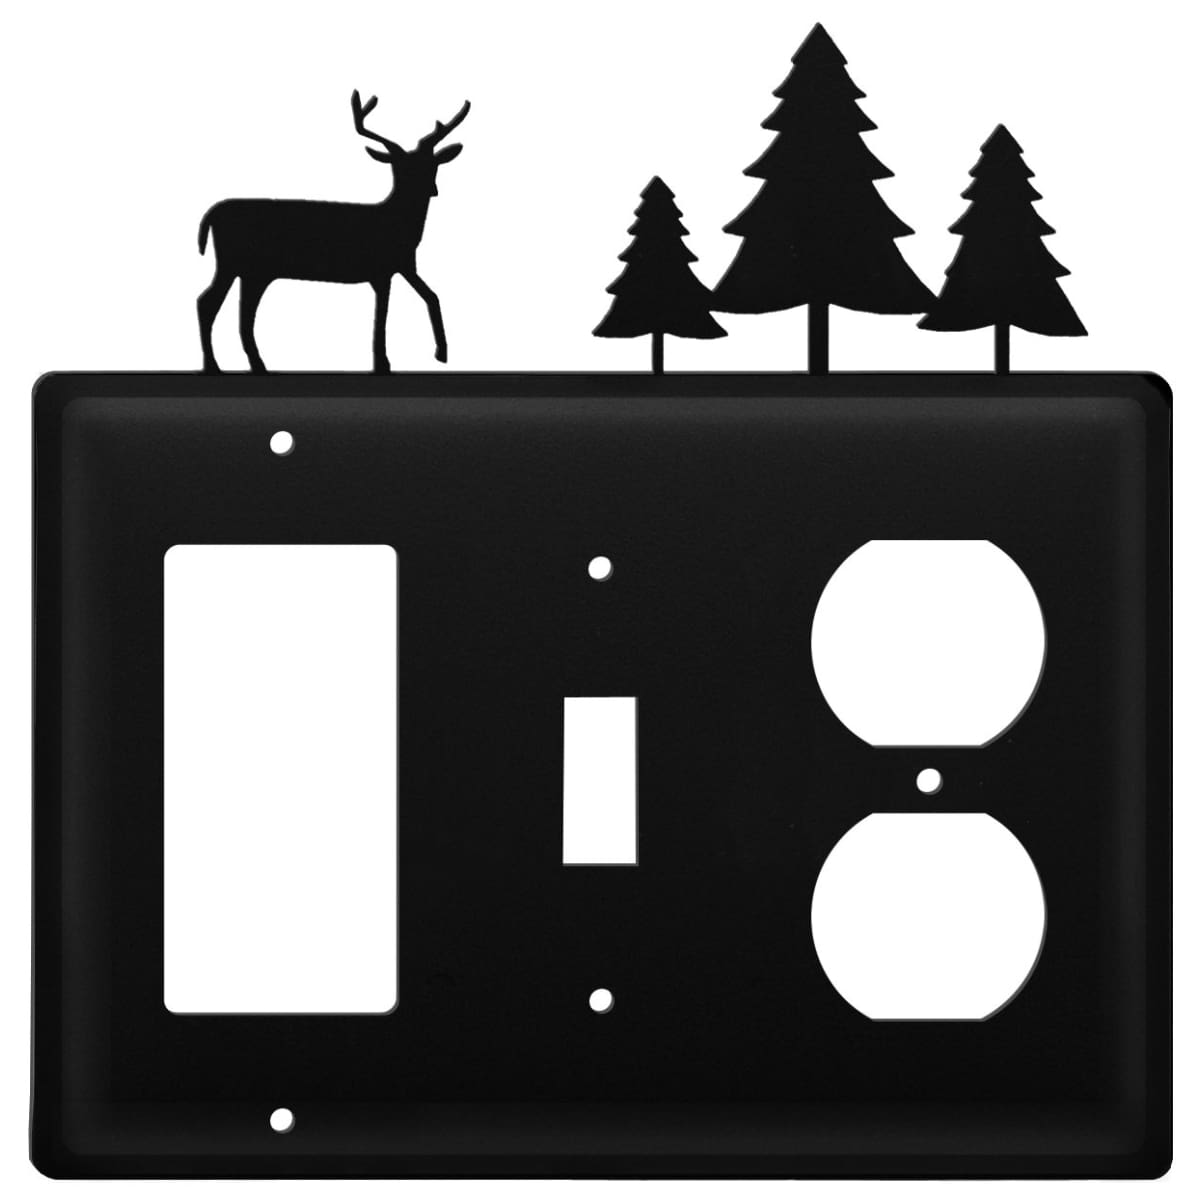 Triple Deer & Pine Trees Single GFI Switch and Outlet Cover CUSTOM Product